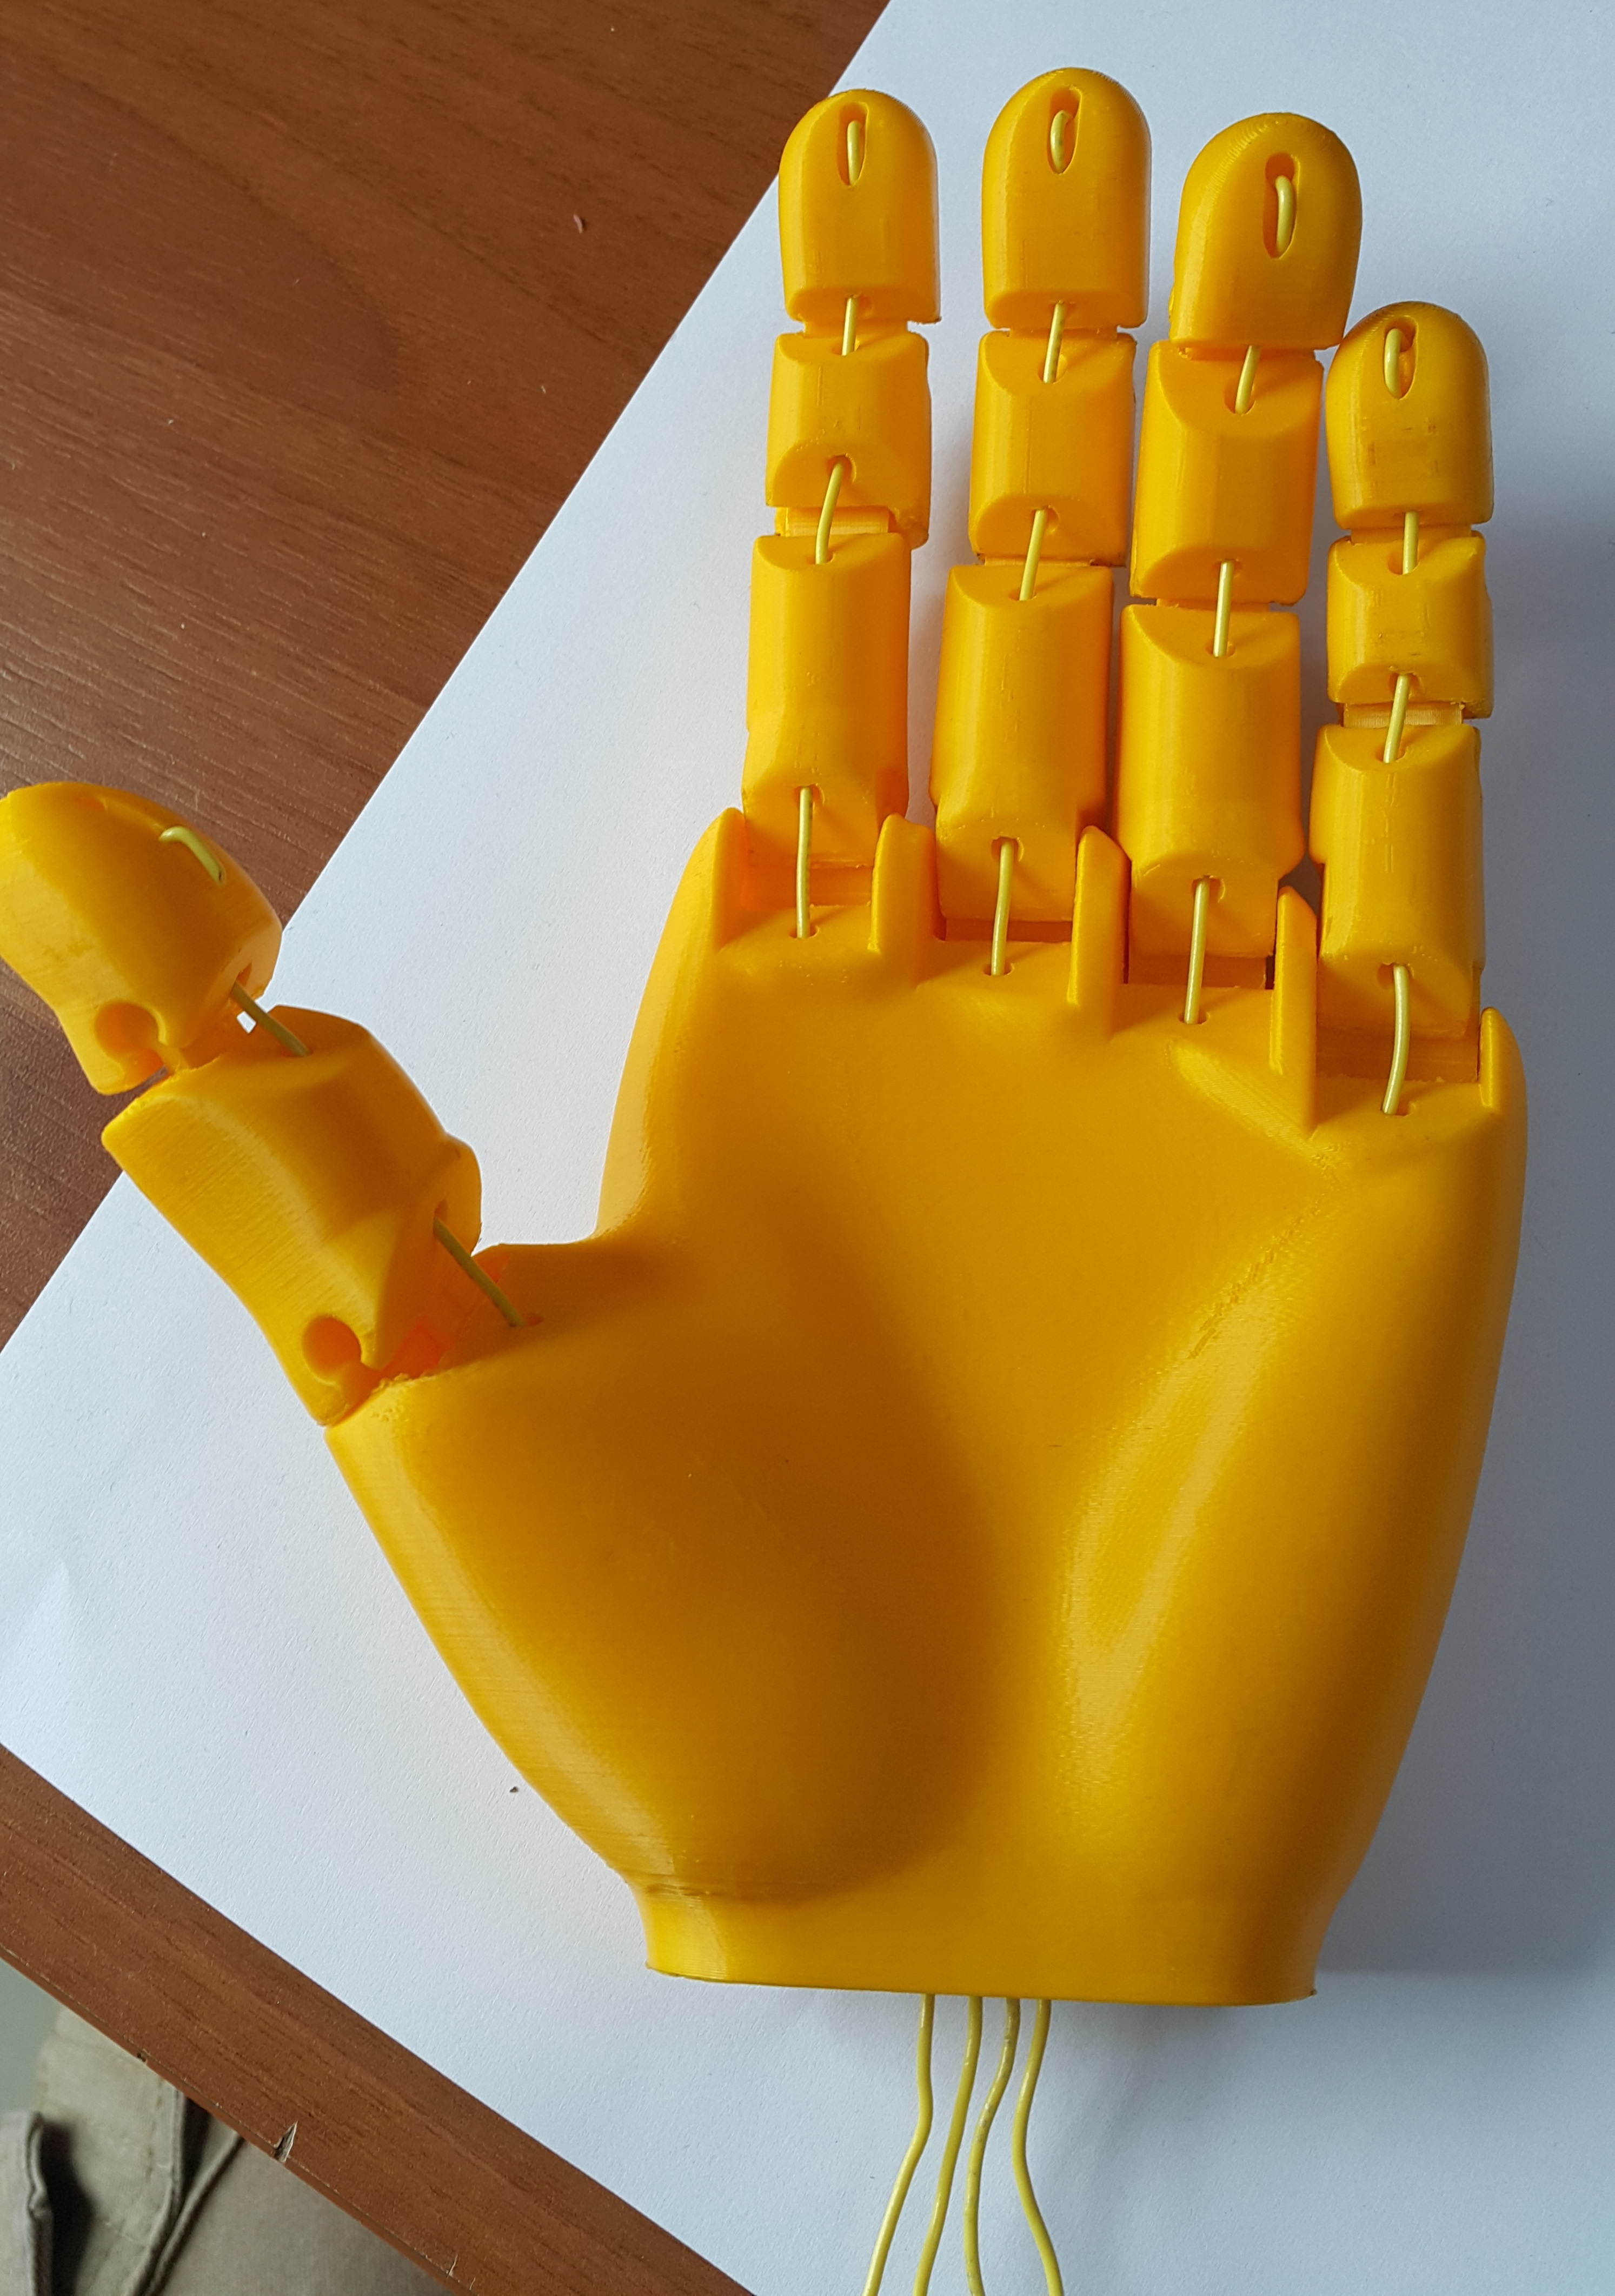 The News of “3D Printed Robotic Hand” produced by Near East University Scientists published in the world’s best 3D printing site